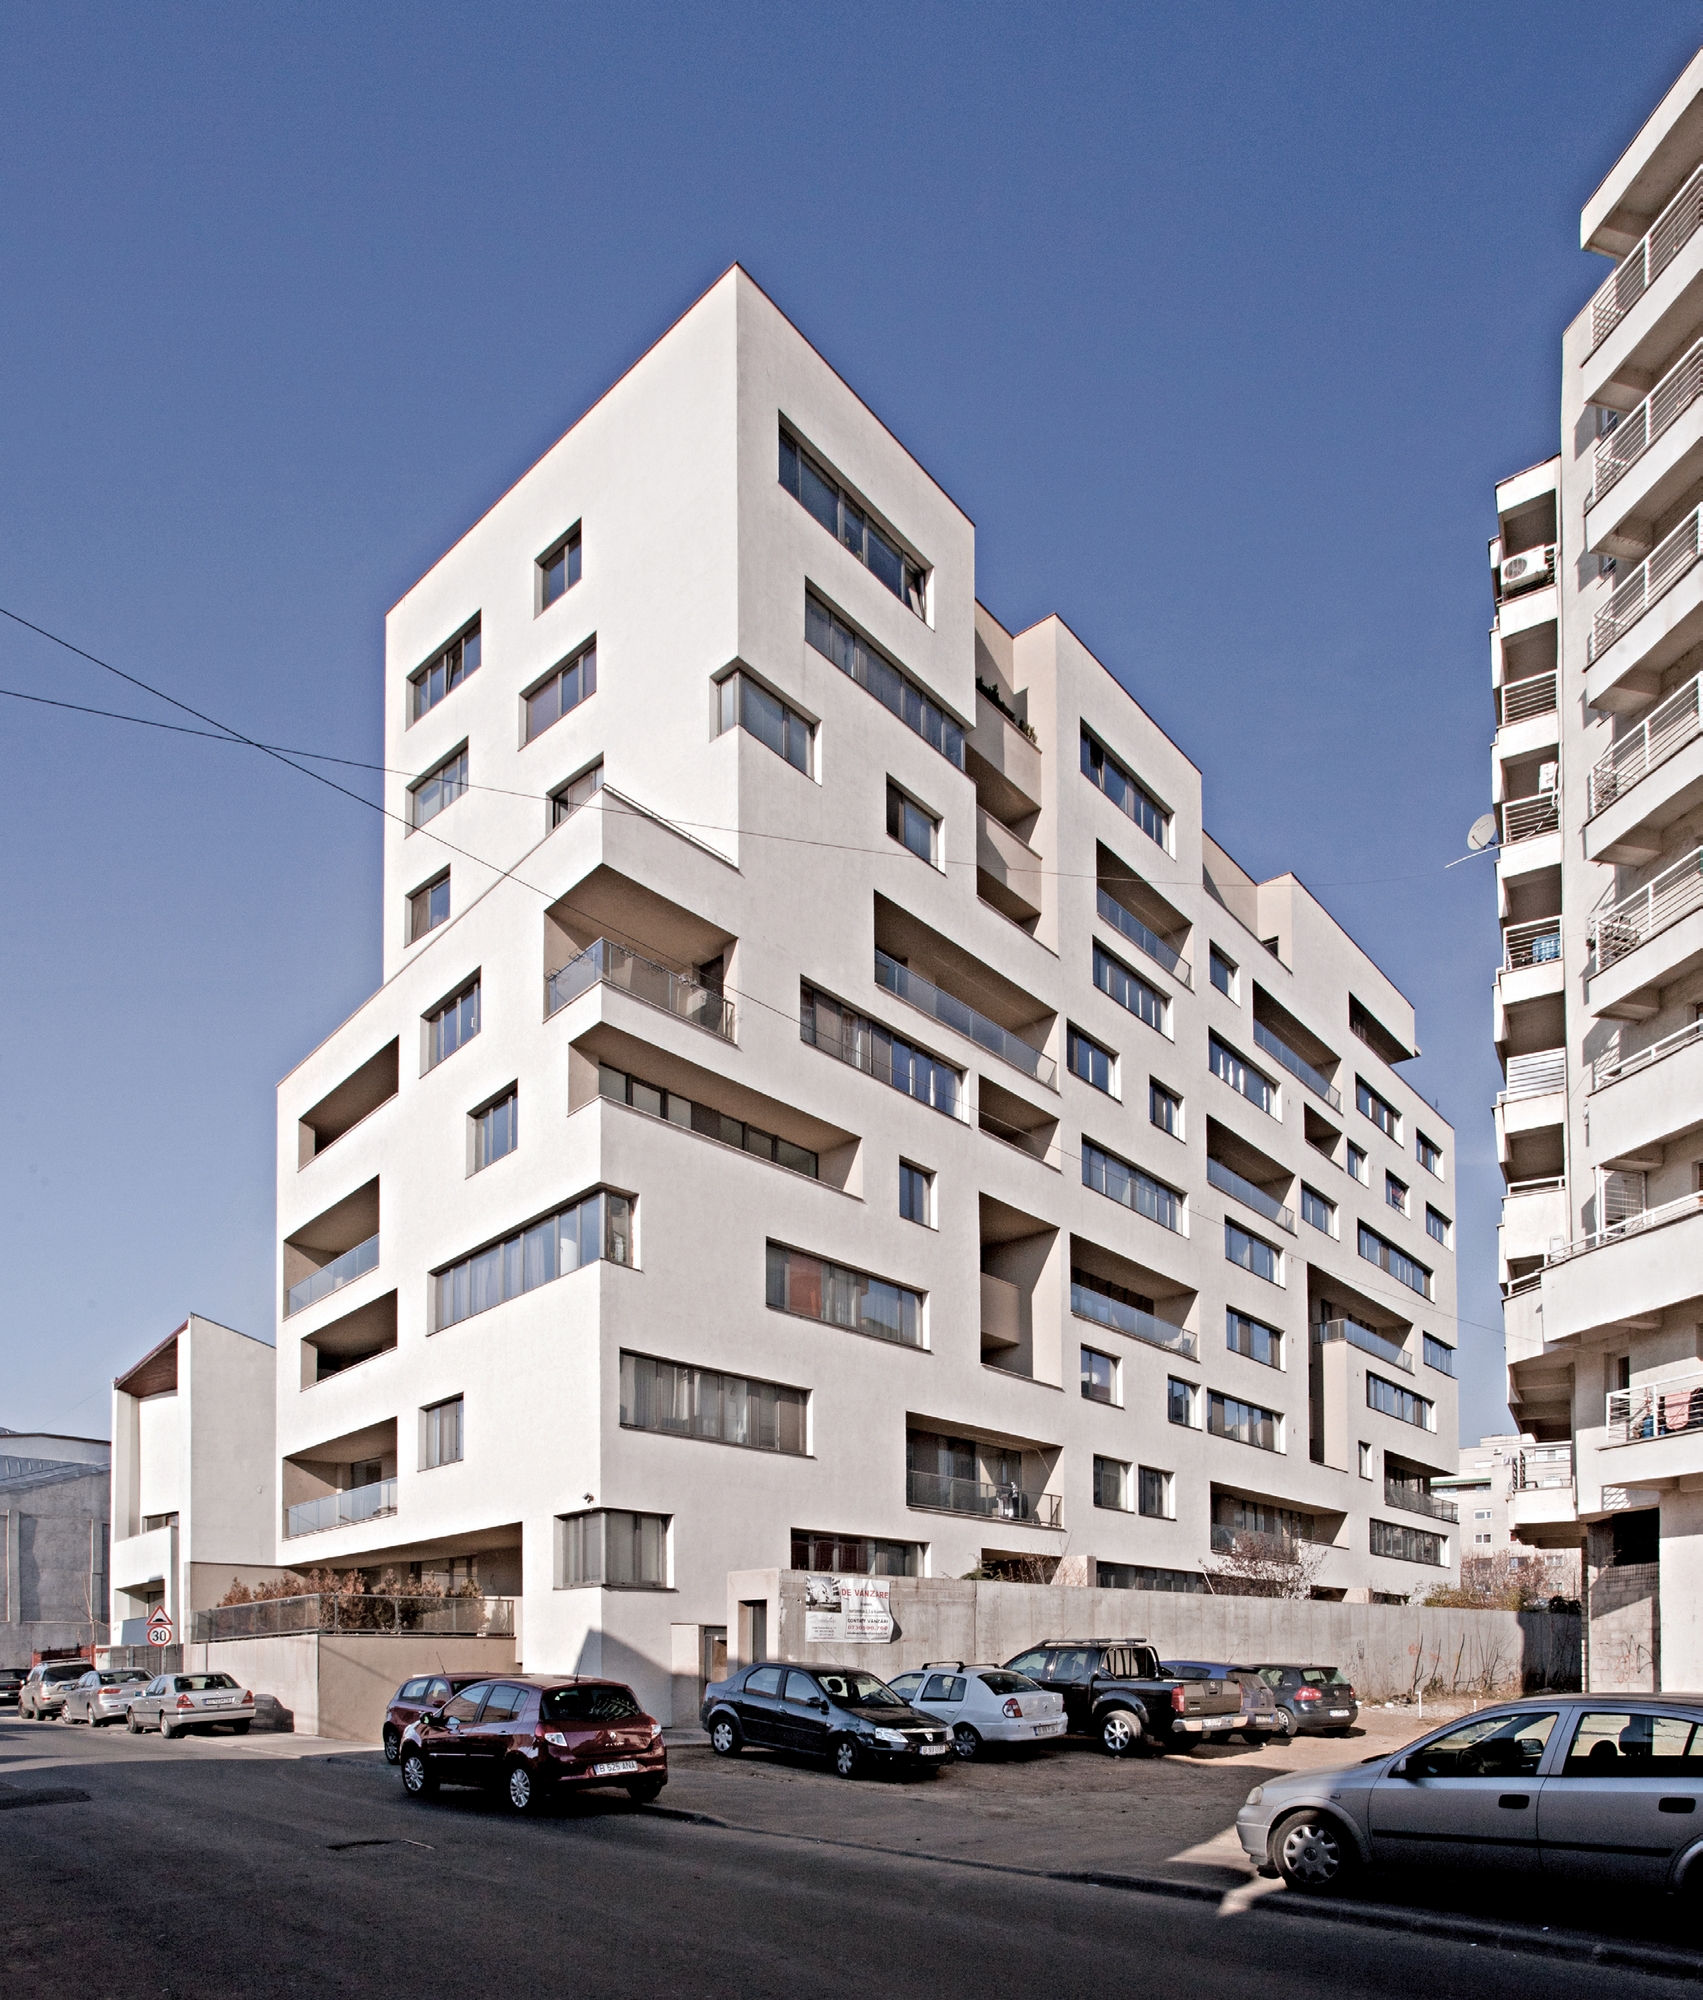 Sirenelor Apartments cover